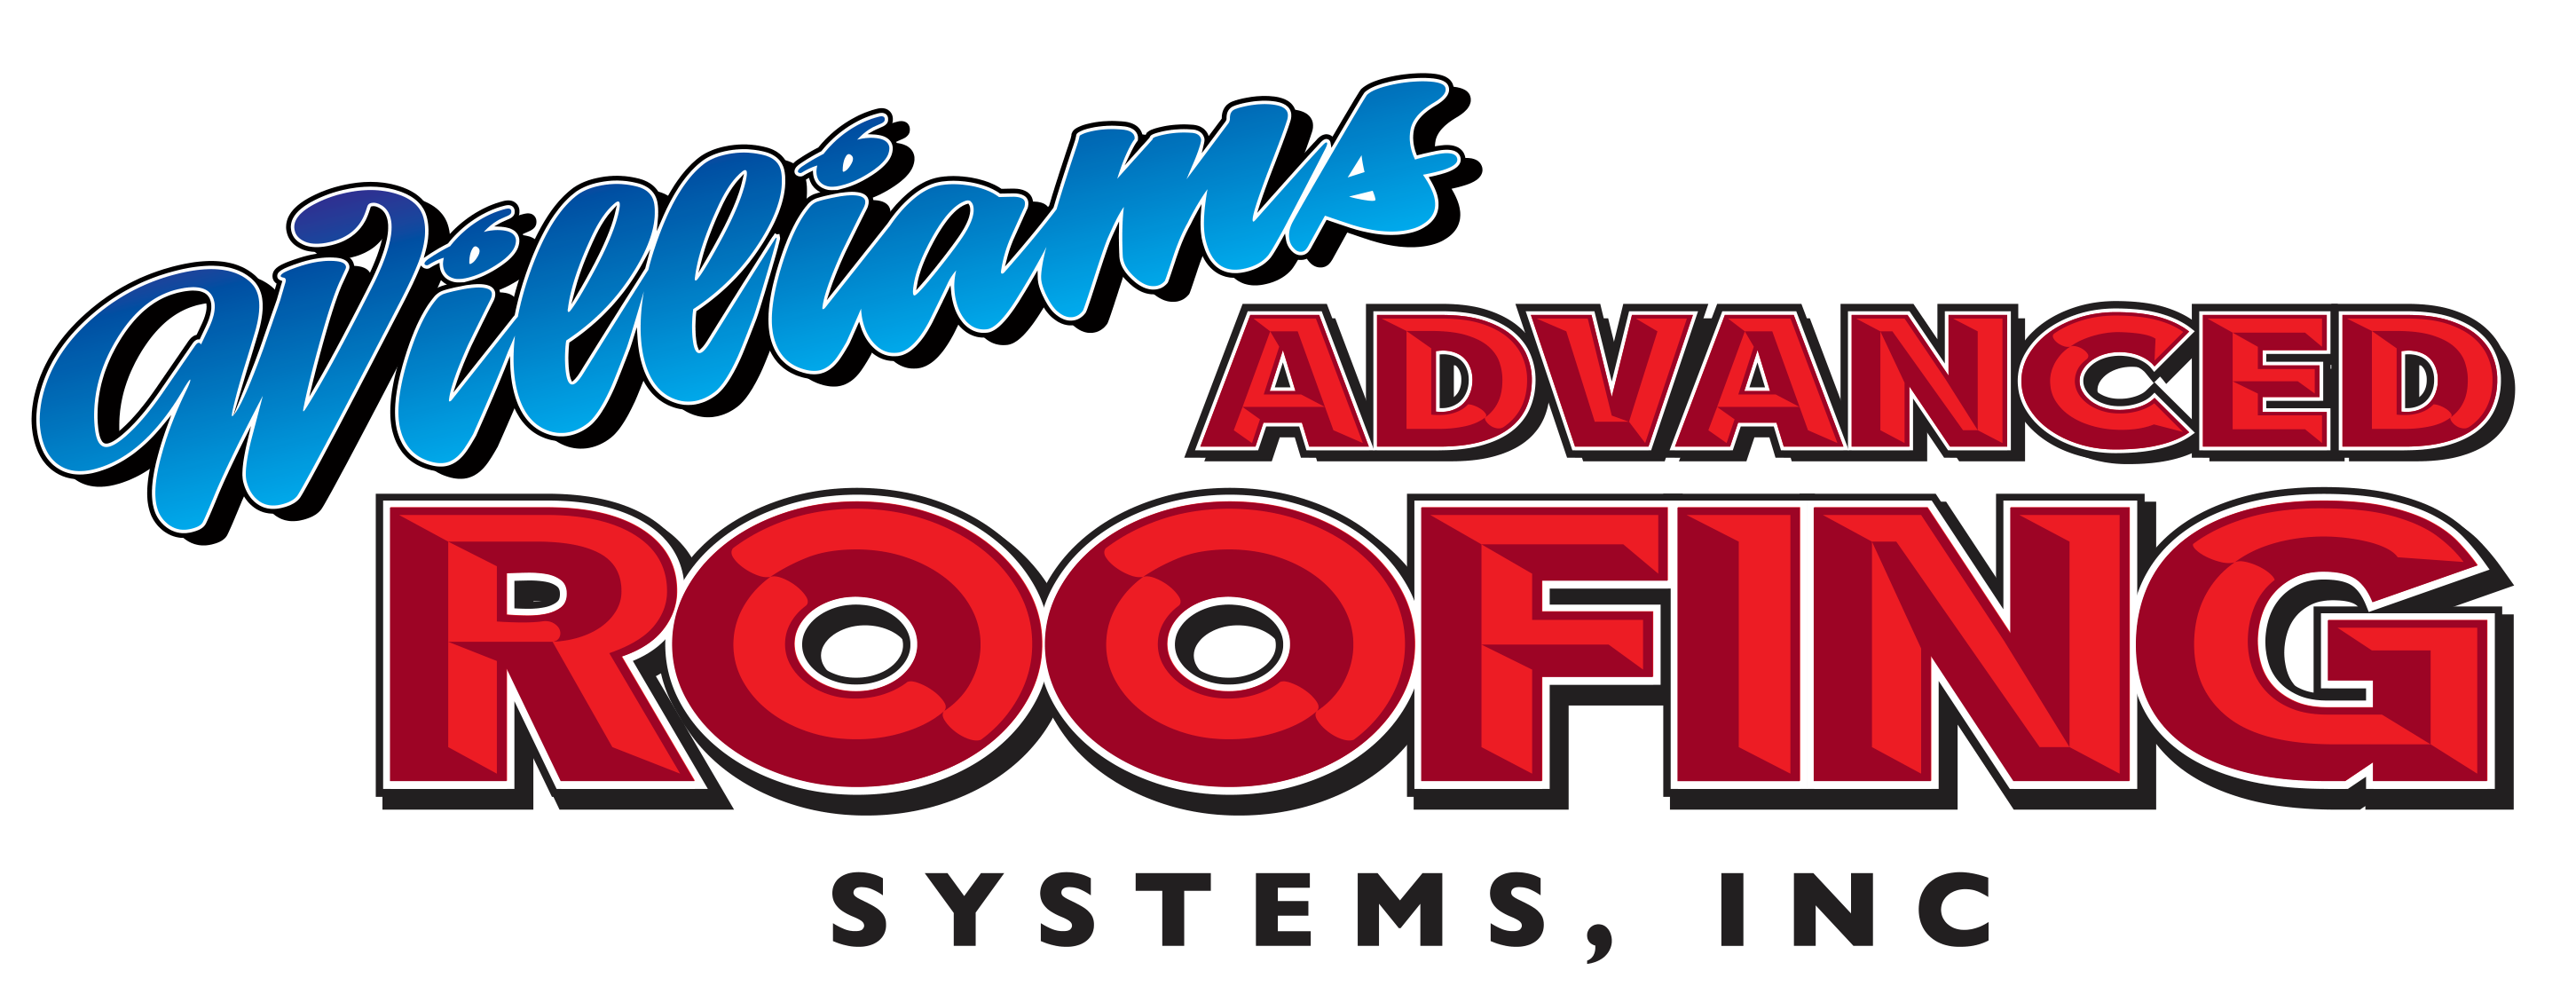 Williams Roofing